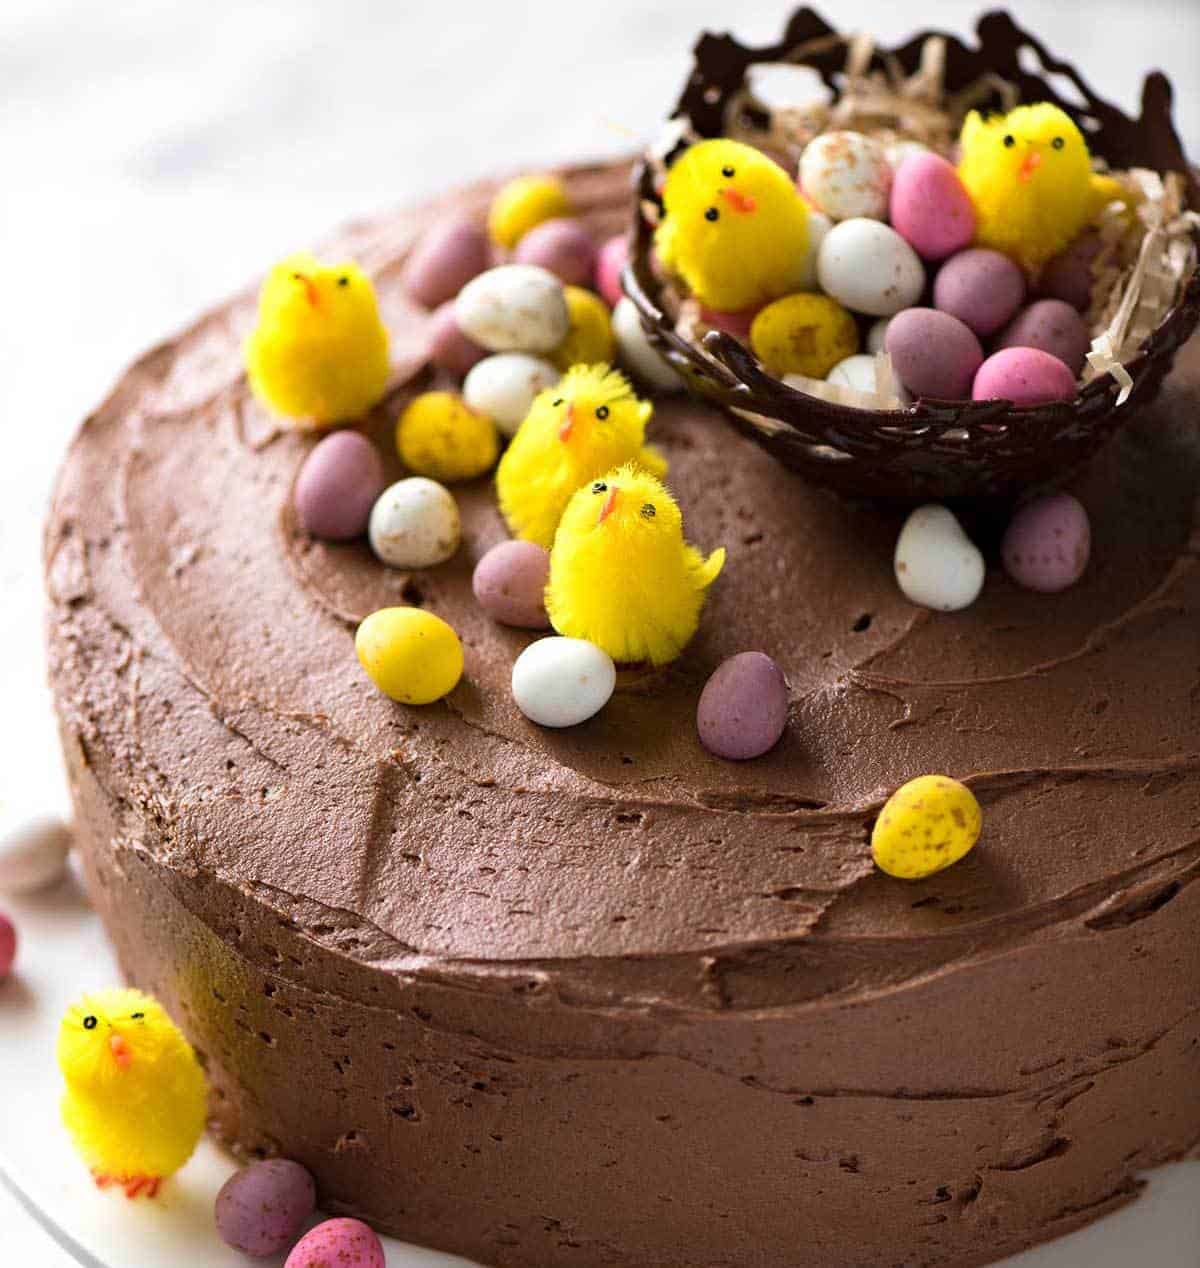 A Chocolate Cake with Buttercream Frosting decorated with small speckled Easter eggs and tiny fluffy yellow chicks.